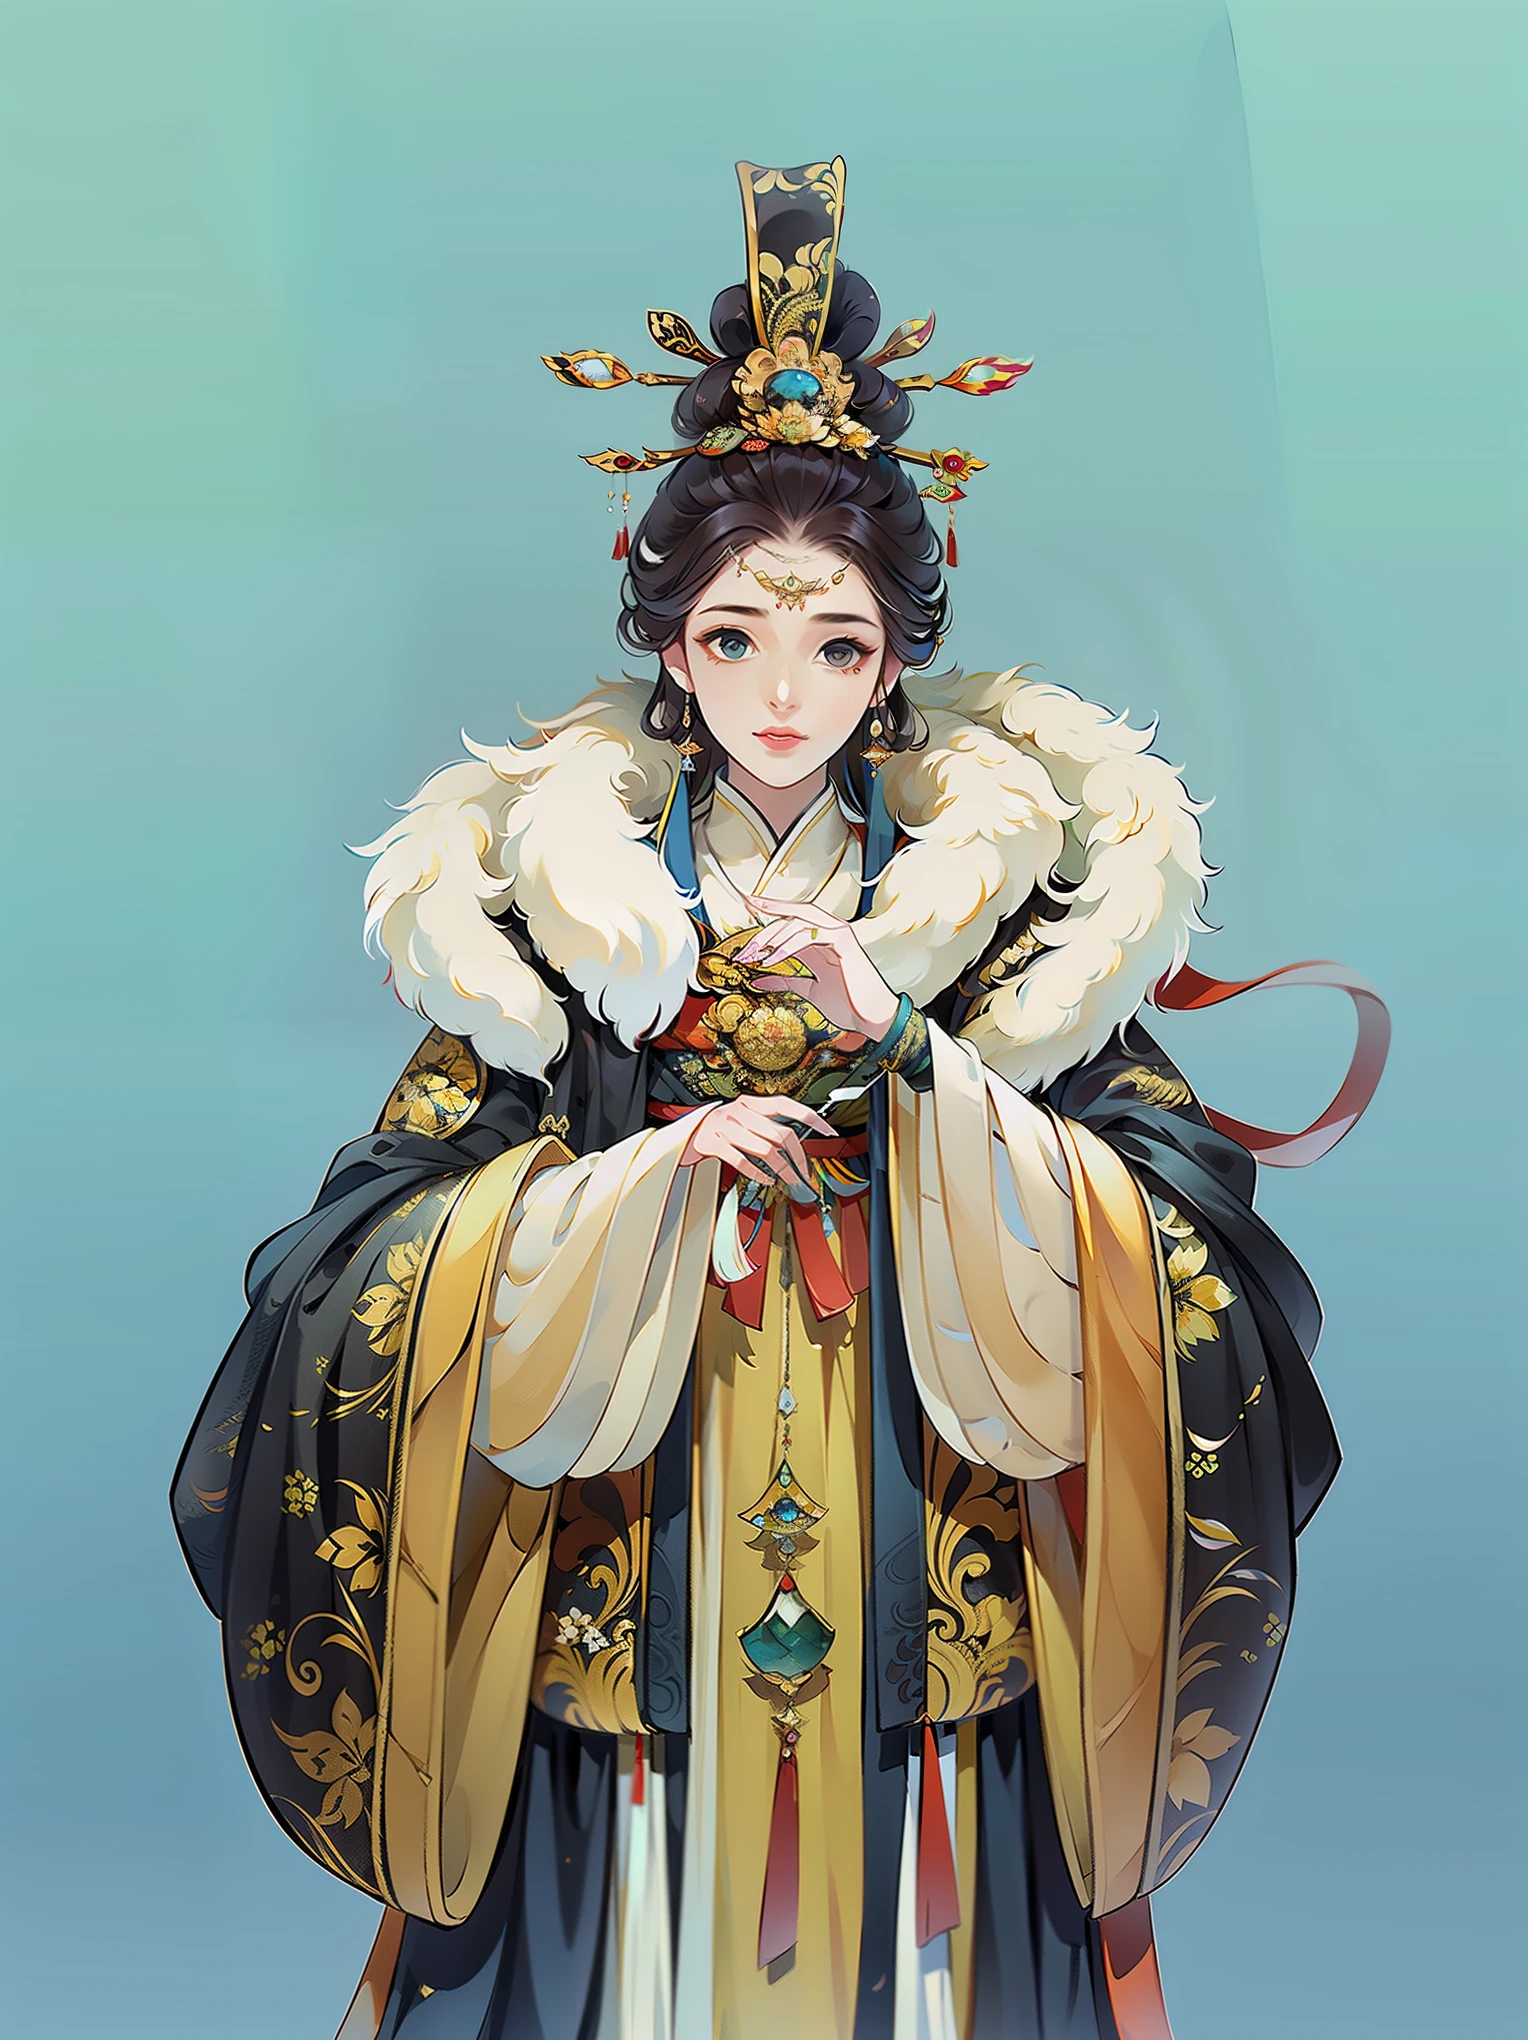 （masterpiece，super detailed，HD details，highly detailed art）1 girl，Half body，xianxia，winter clothes，Loose plush jacket，hairy，warm，elegant，elegant，Highly detailed character designs from East Asia，Game character costume design，simple，ultra high resolution, sharp focus, epic work, masterpiece, (Very detailed CG unified 8k wallpaper)，pretty face，beautiful eyes，HD details